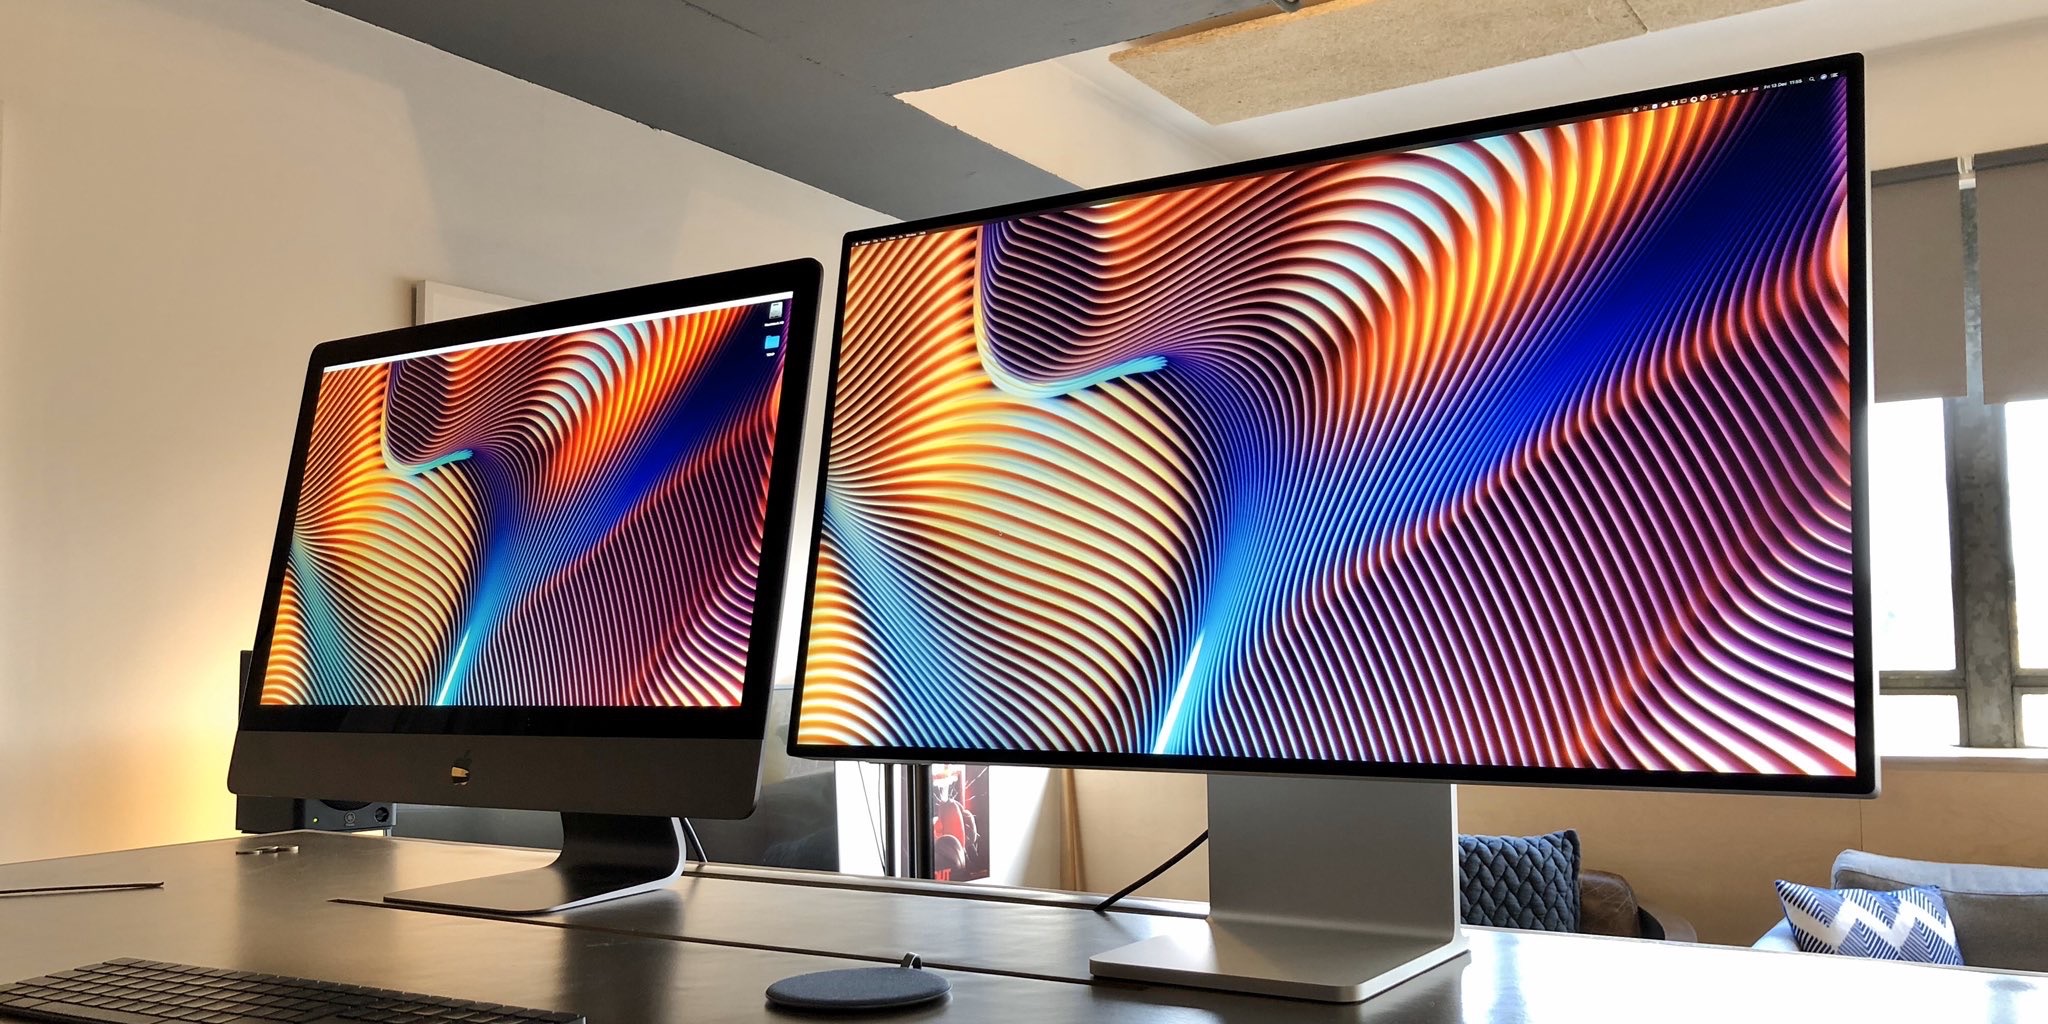 Roundup Here's what to expect from the iMac lineup in 2022 9to5Mac